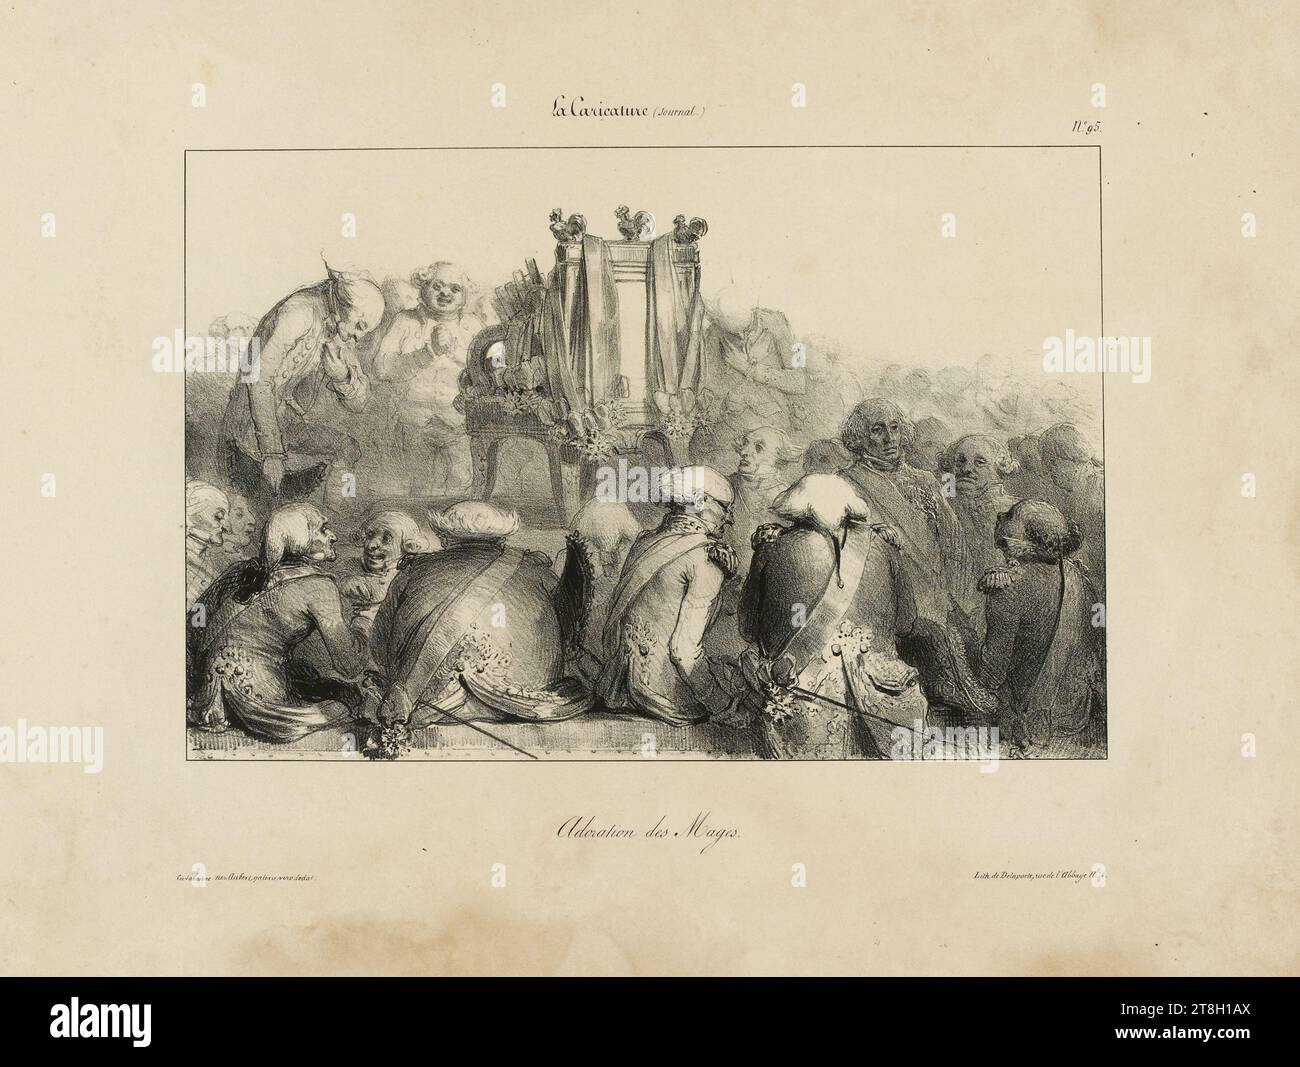 N°95, La caricature (journal), Adoration of the Magi, Draughtsman-Lithographer, Delaporte, Victor Hippolyte, Printer-Lithographer, Aubert, Publisher, Between 1830 and 1847, Print, Graphic arts, Print, Lithography, Dimensions - Work: Height: 27.4 cm, Width: 36.4 cm, Dimensions - Mounting:, Height: 32.5 cm, Width: 50 cm Stock Photo